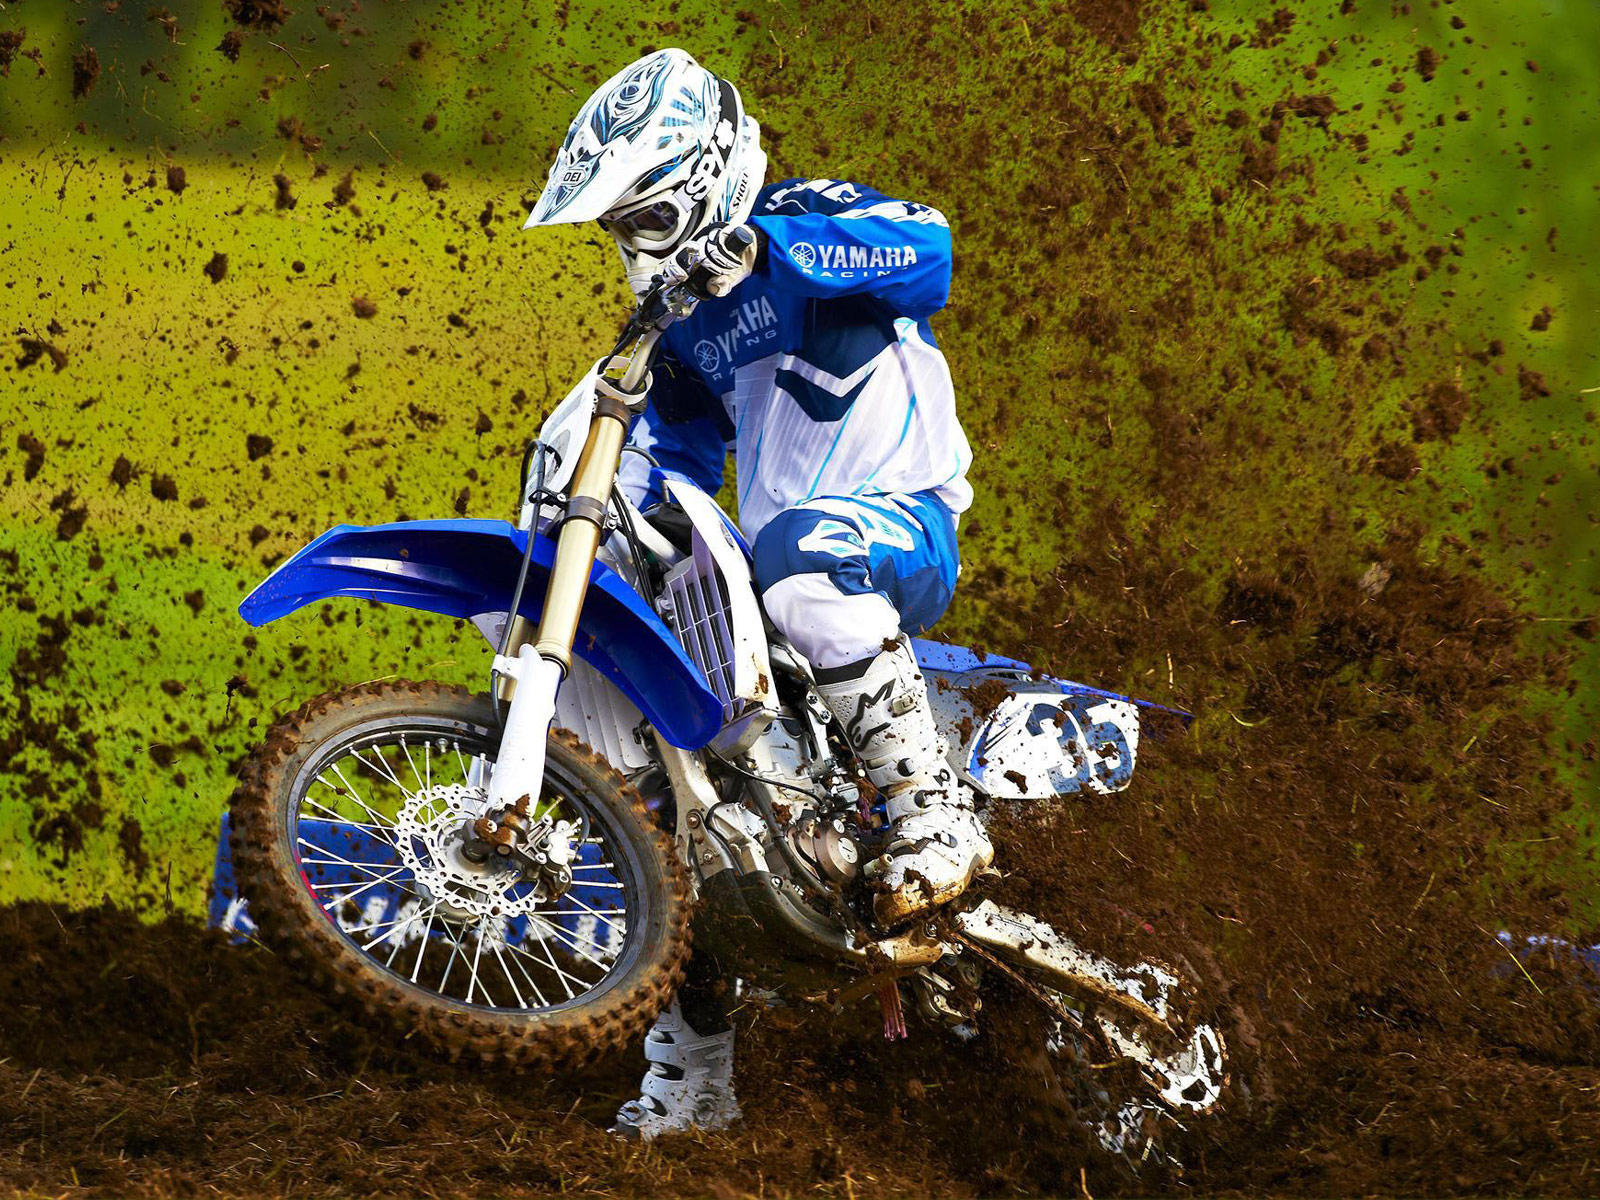 Yamaha Yz250f Accident Lawyer Wallpaper Specifications